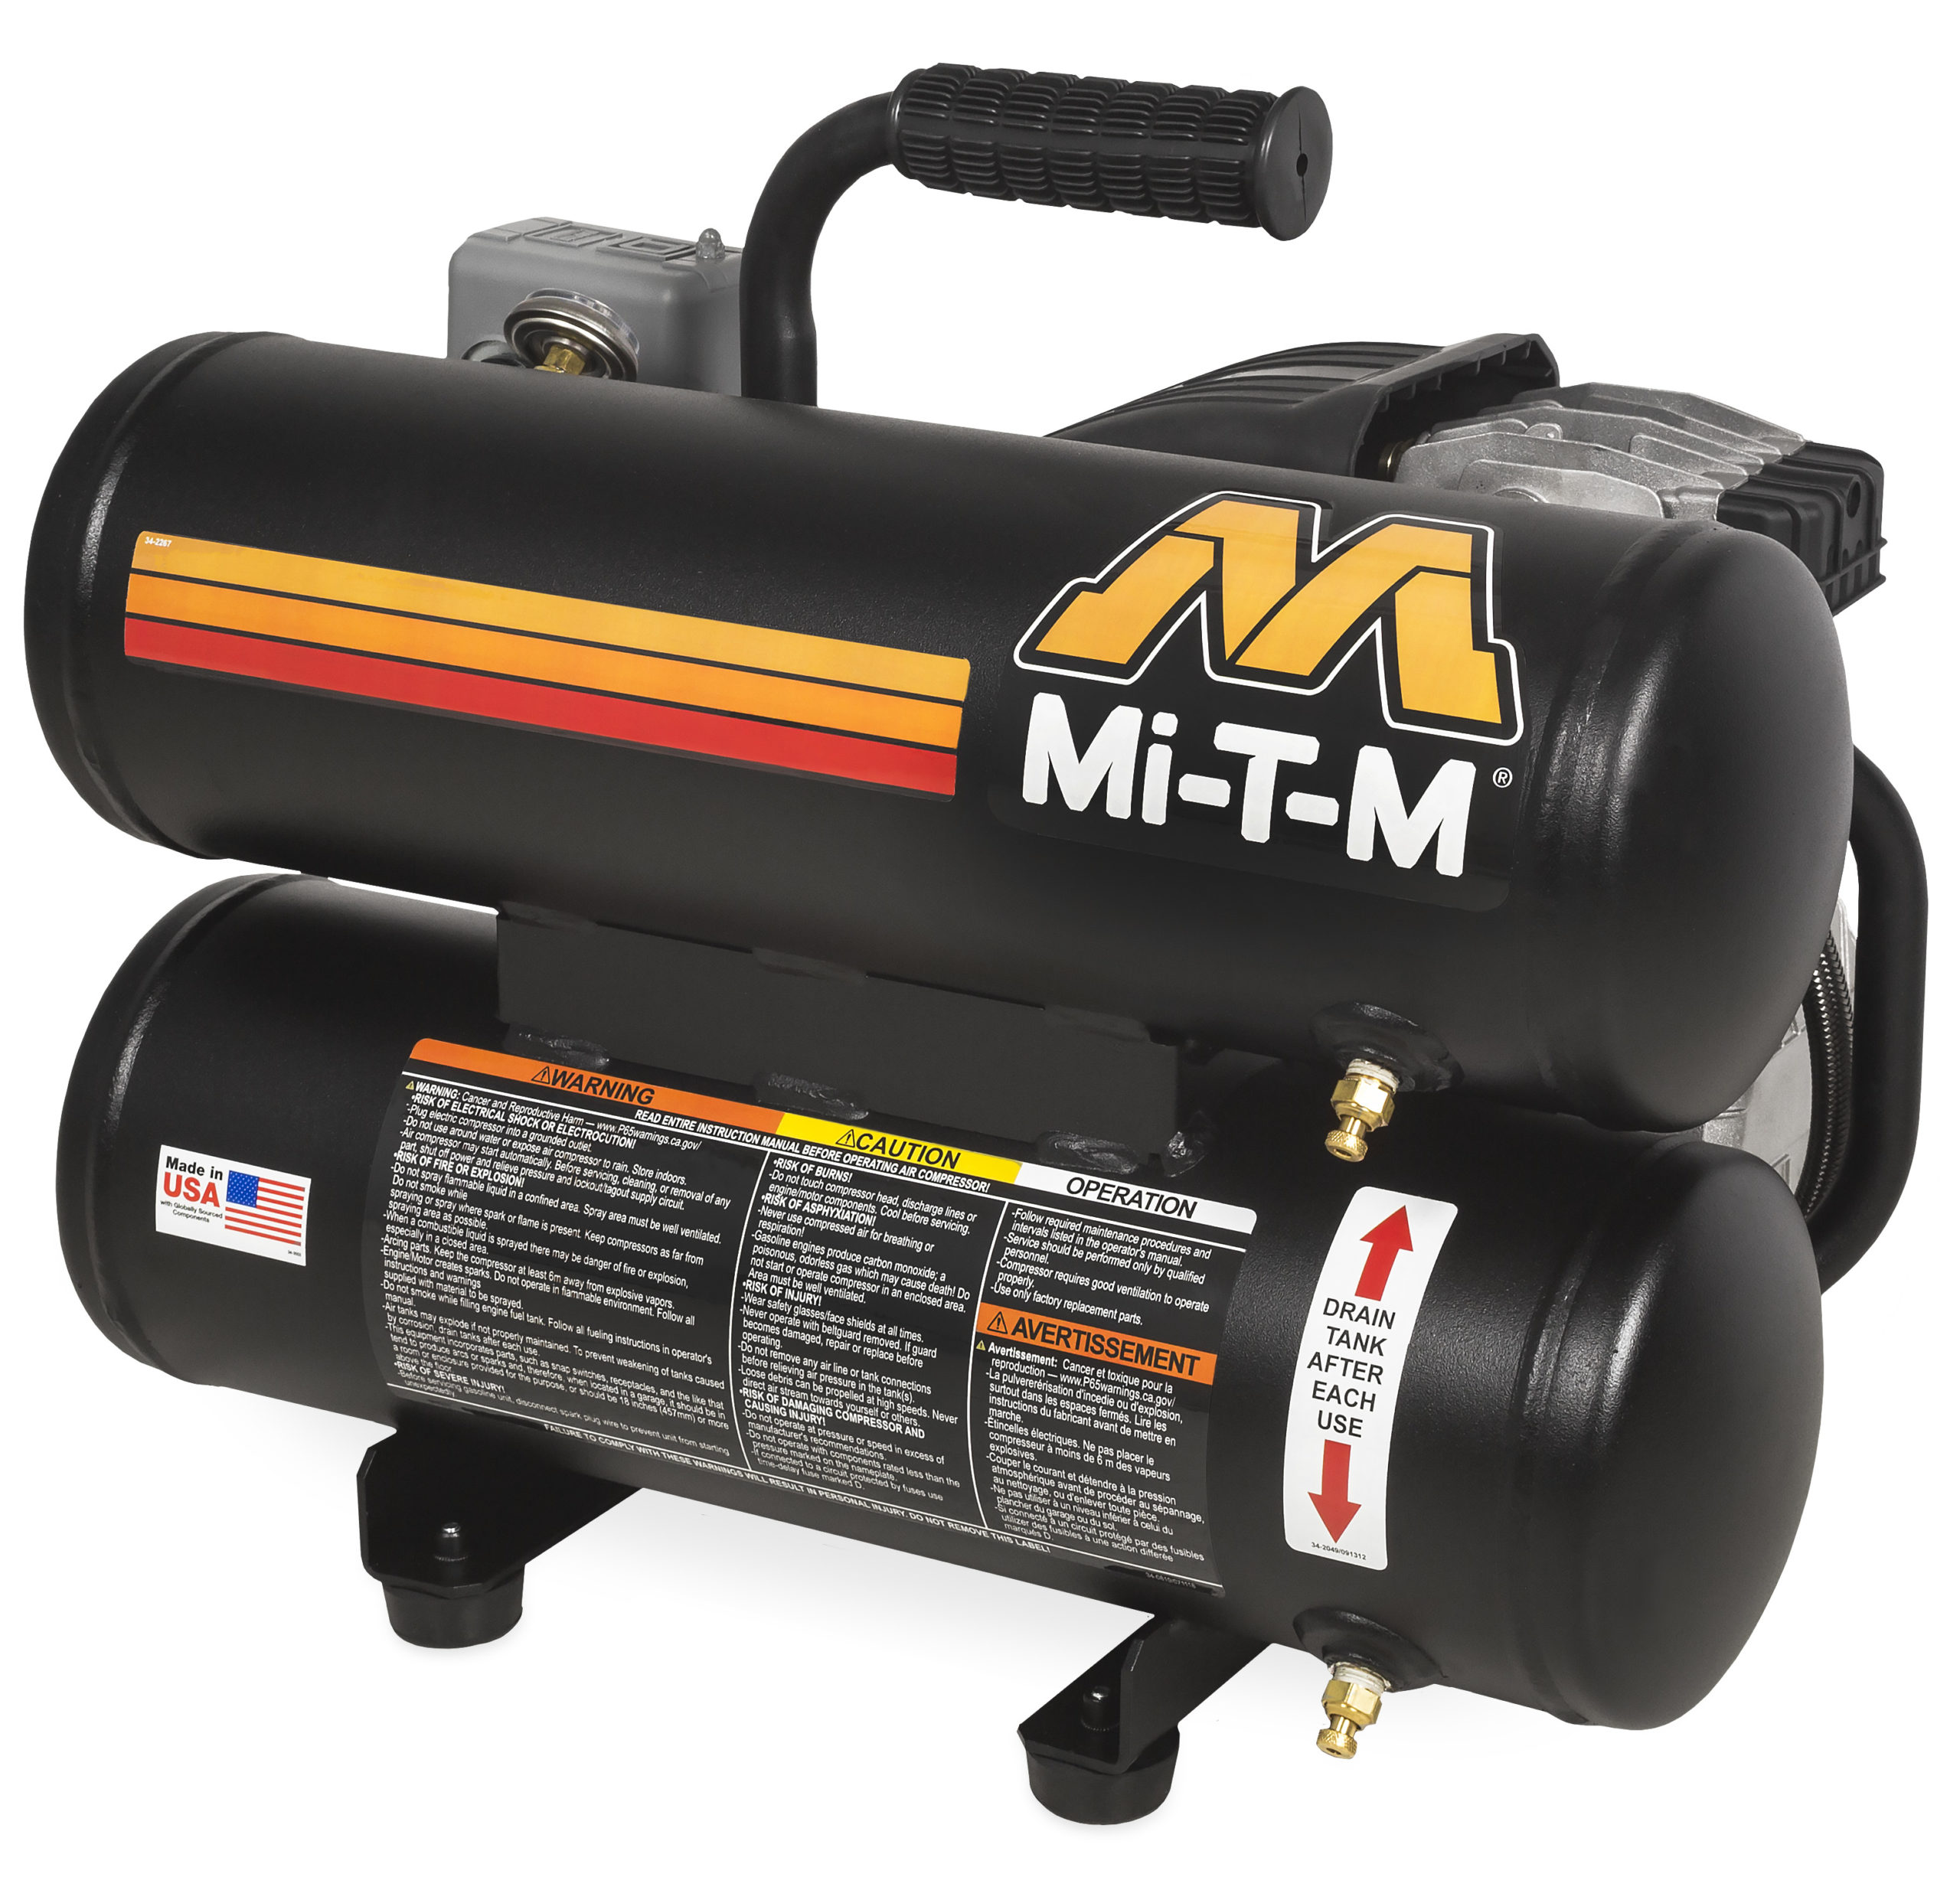 Residential Air Compressors - Small Engine Solutions